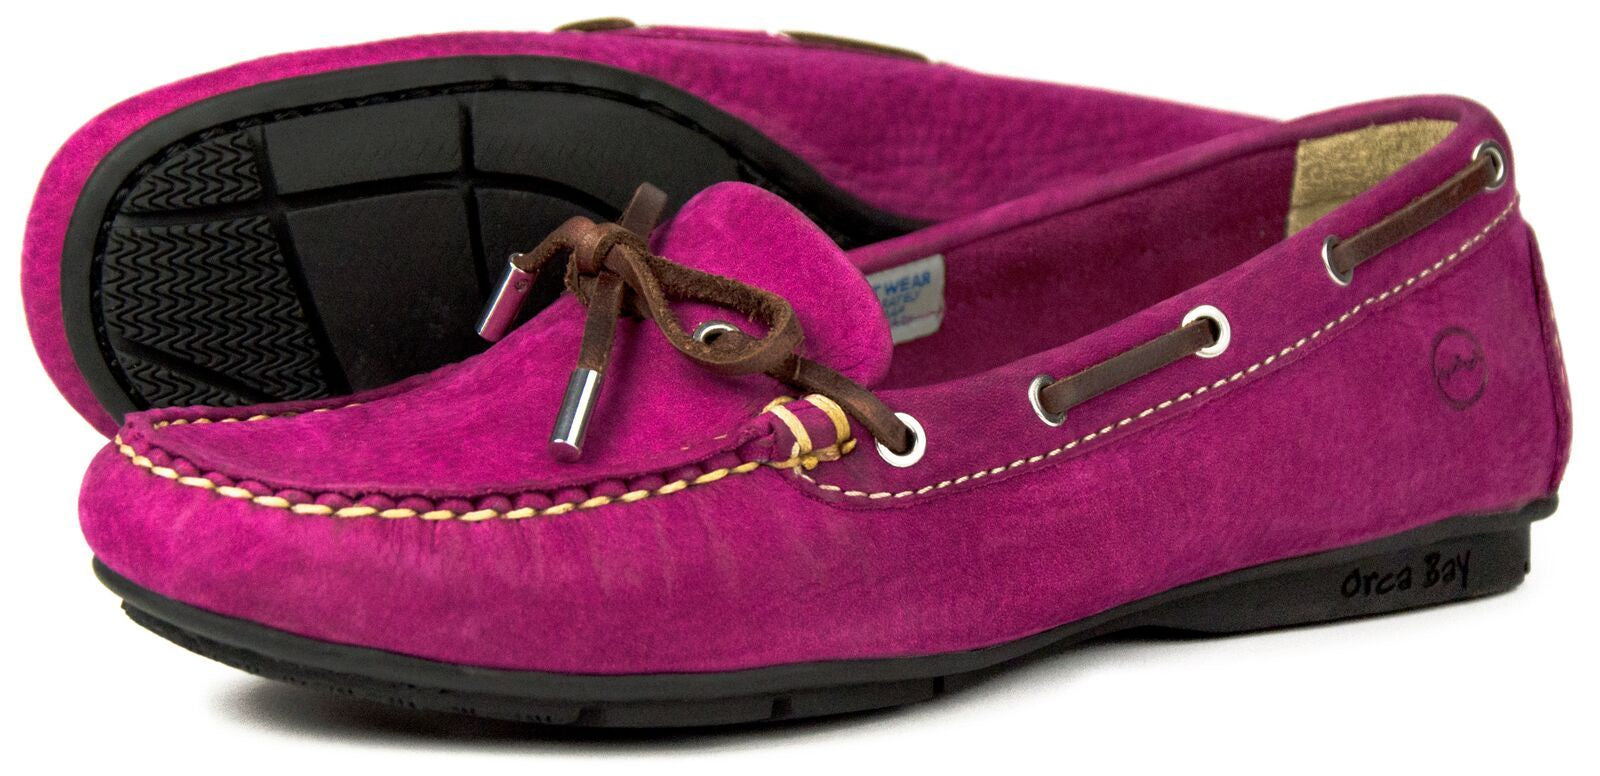 Orca Bay Ballena Deep Pink Ladies Washable Leather Deck Shoes - elevate your sole